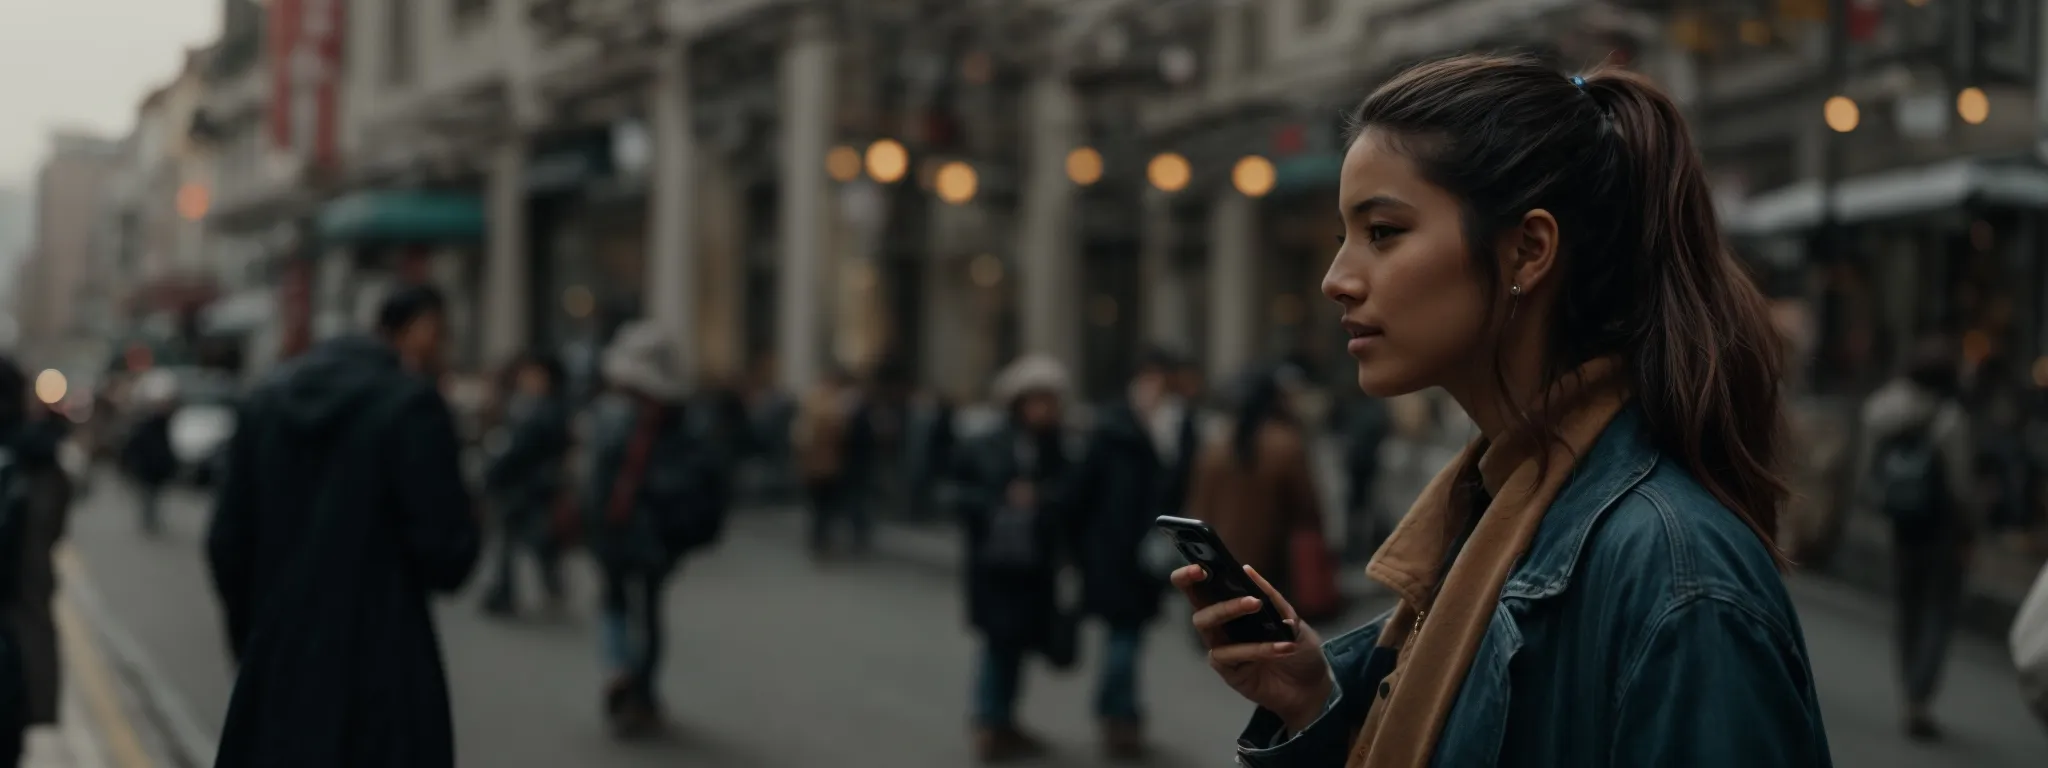 a person speaking to a digital voice assistant on a smartphone while walking in a bustling city street.